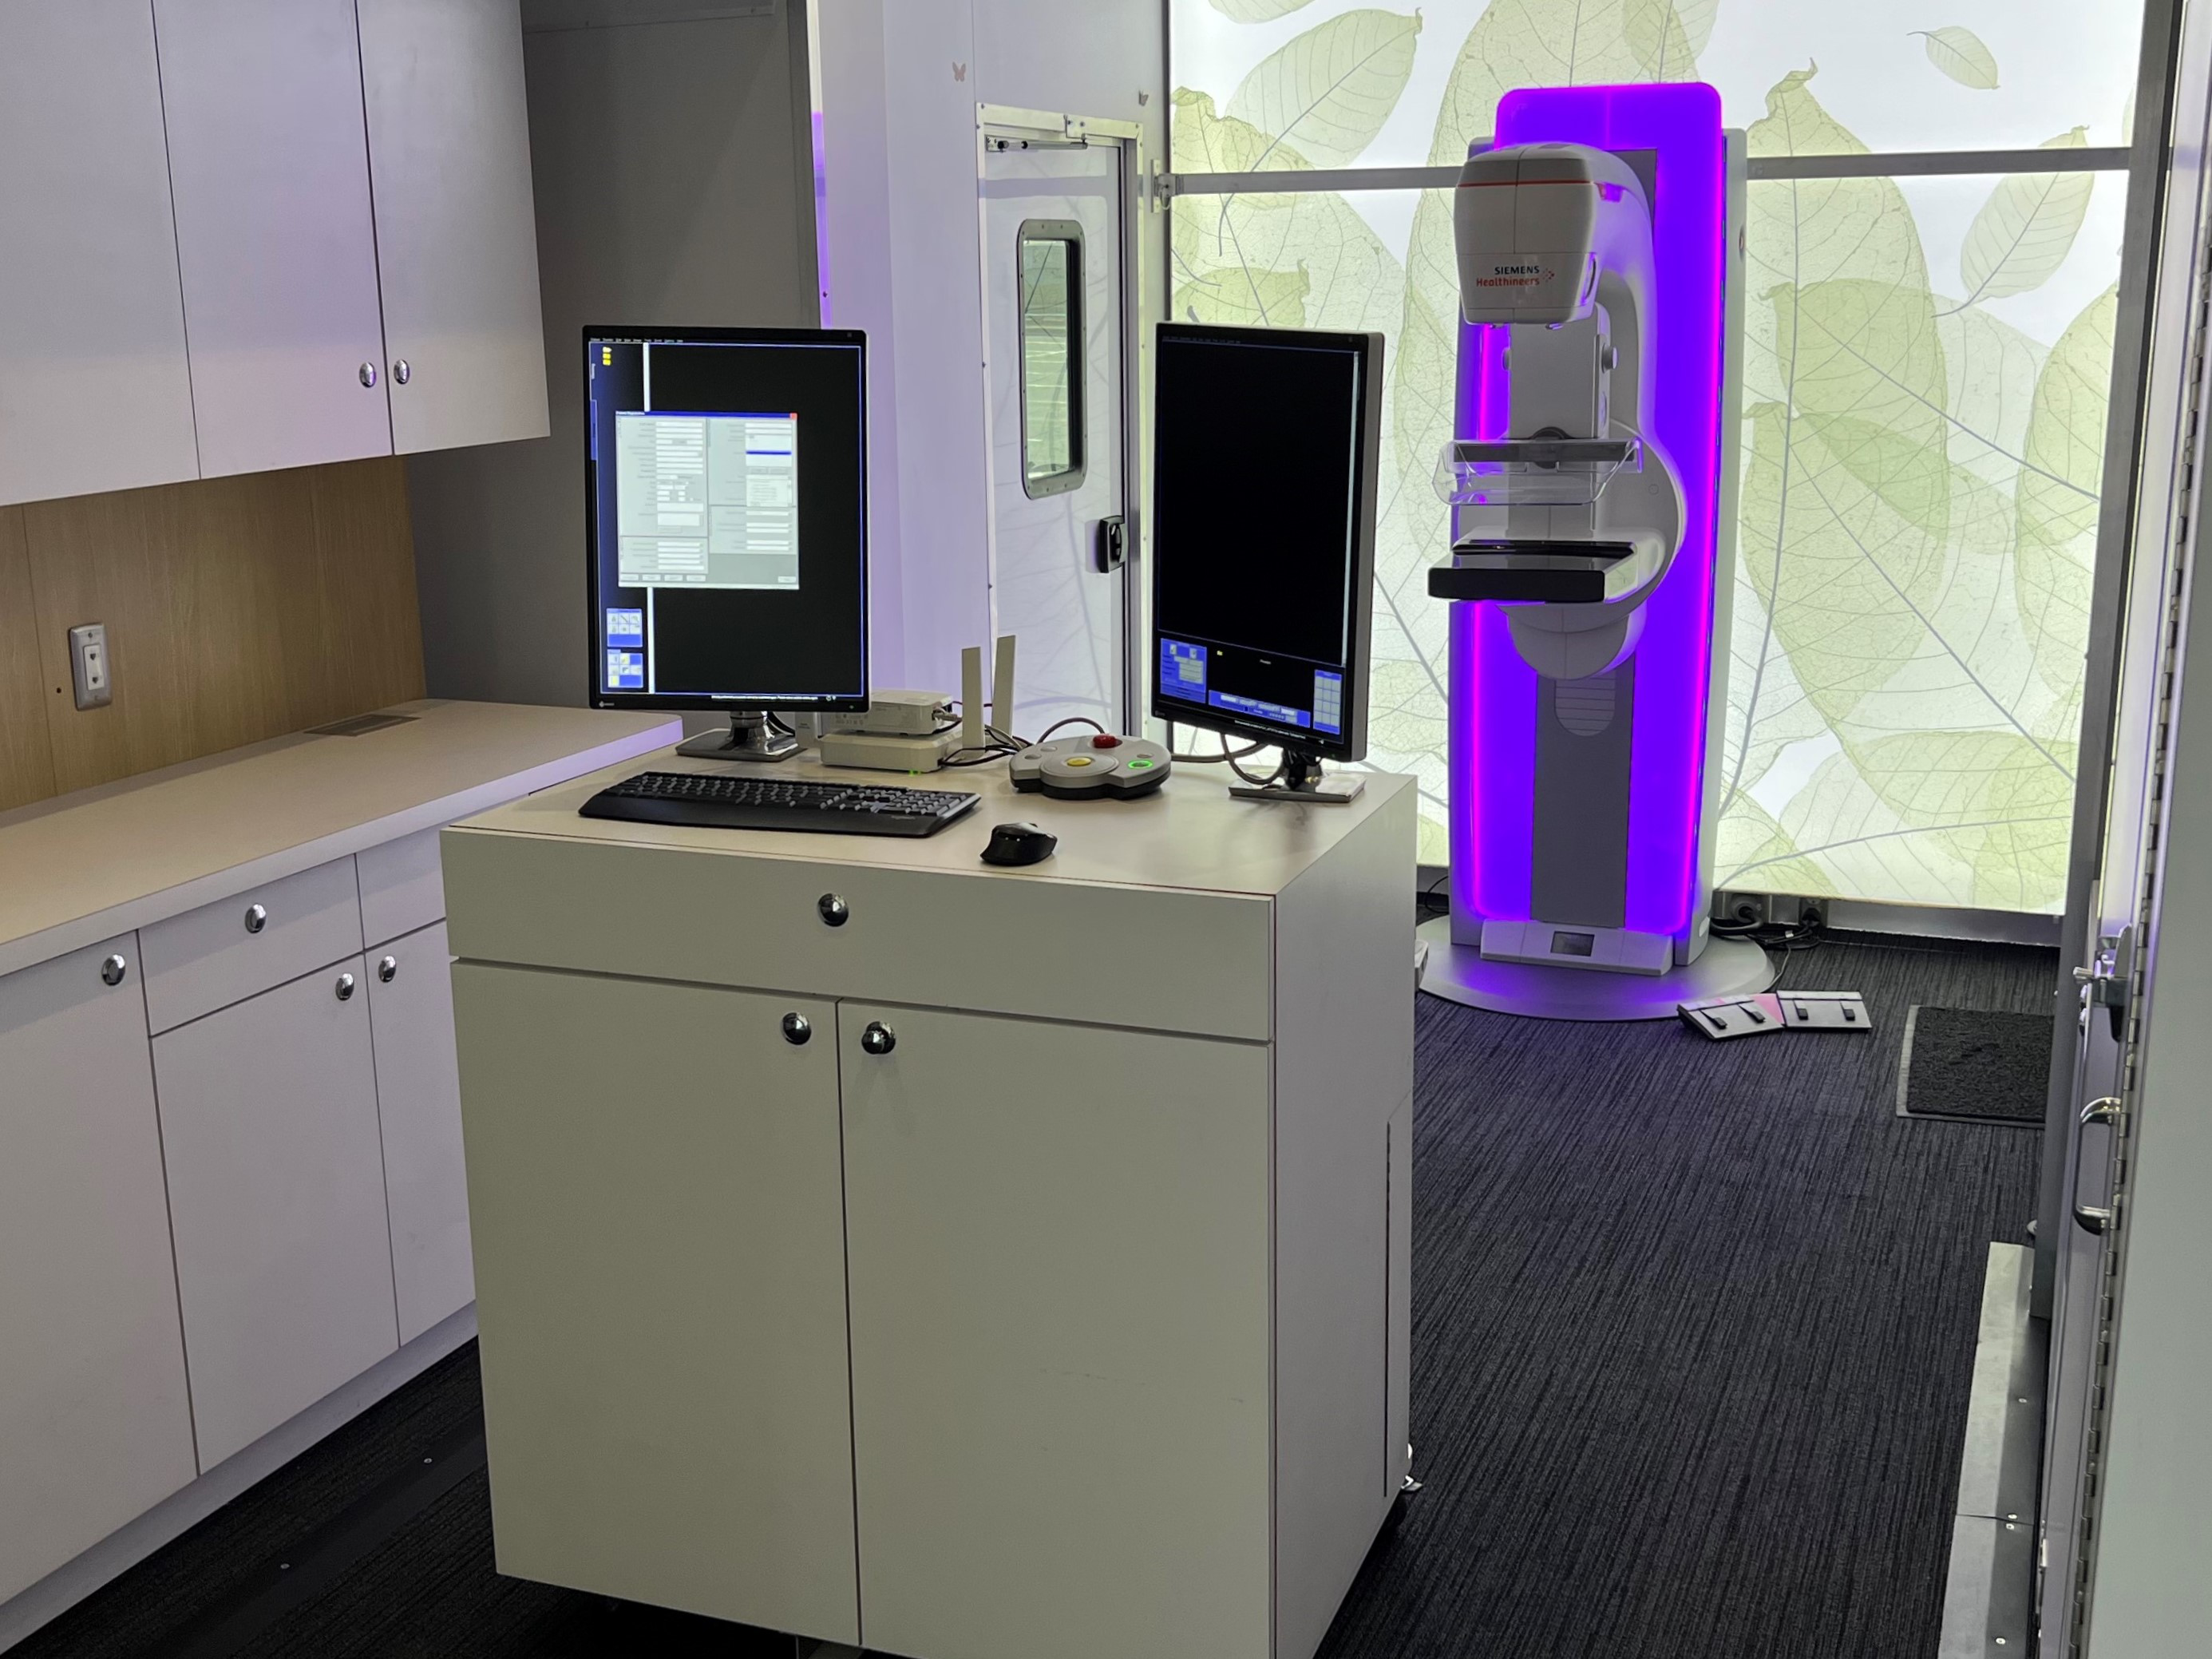 The mobile mammography service featured the latest in breast imaging technology. 